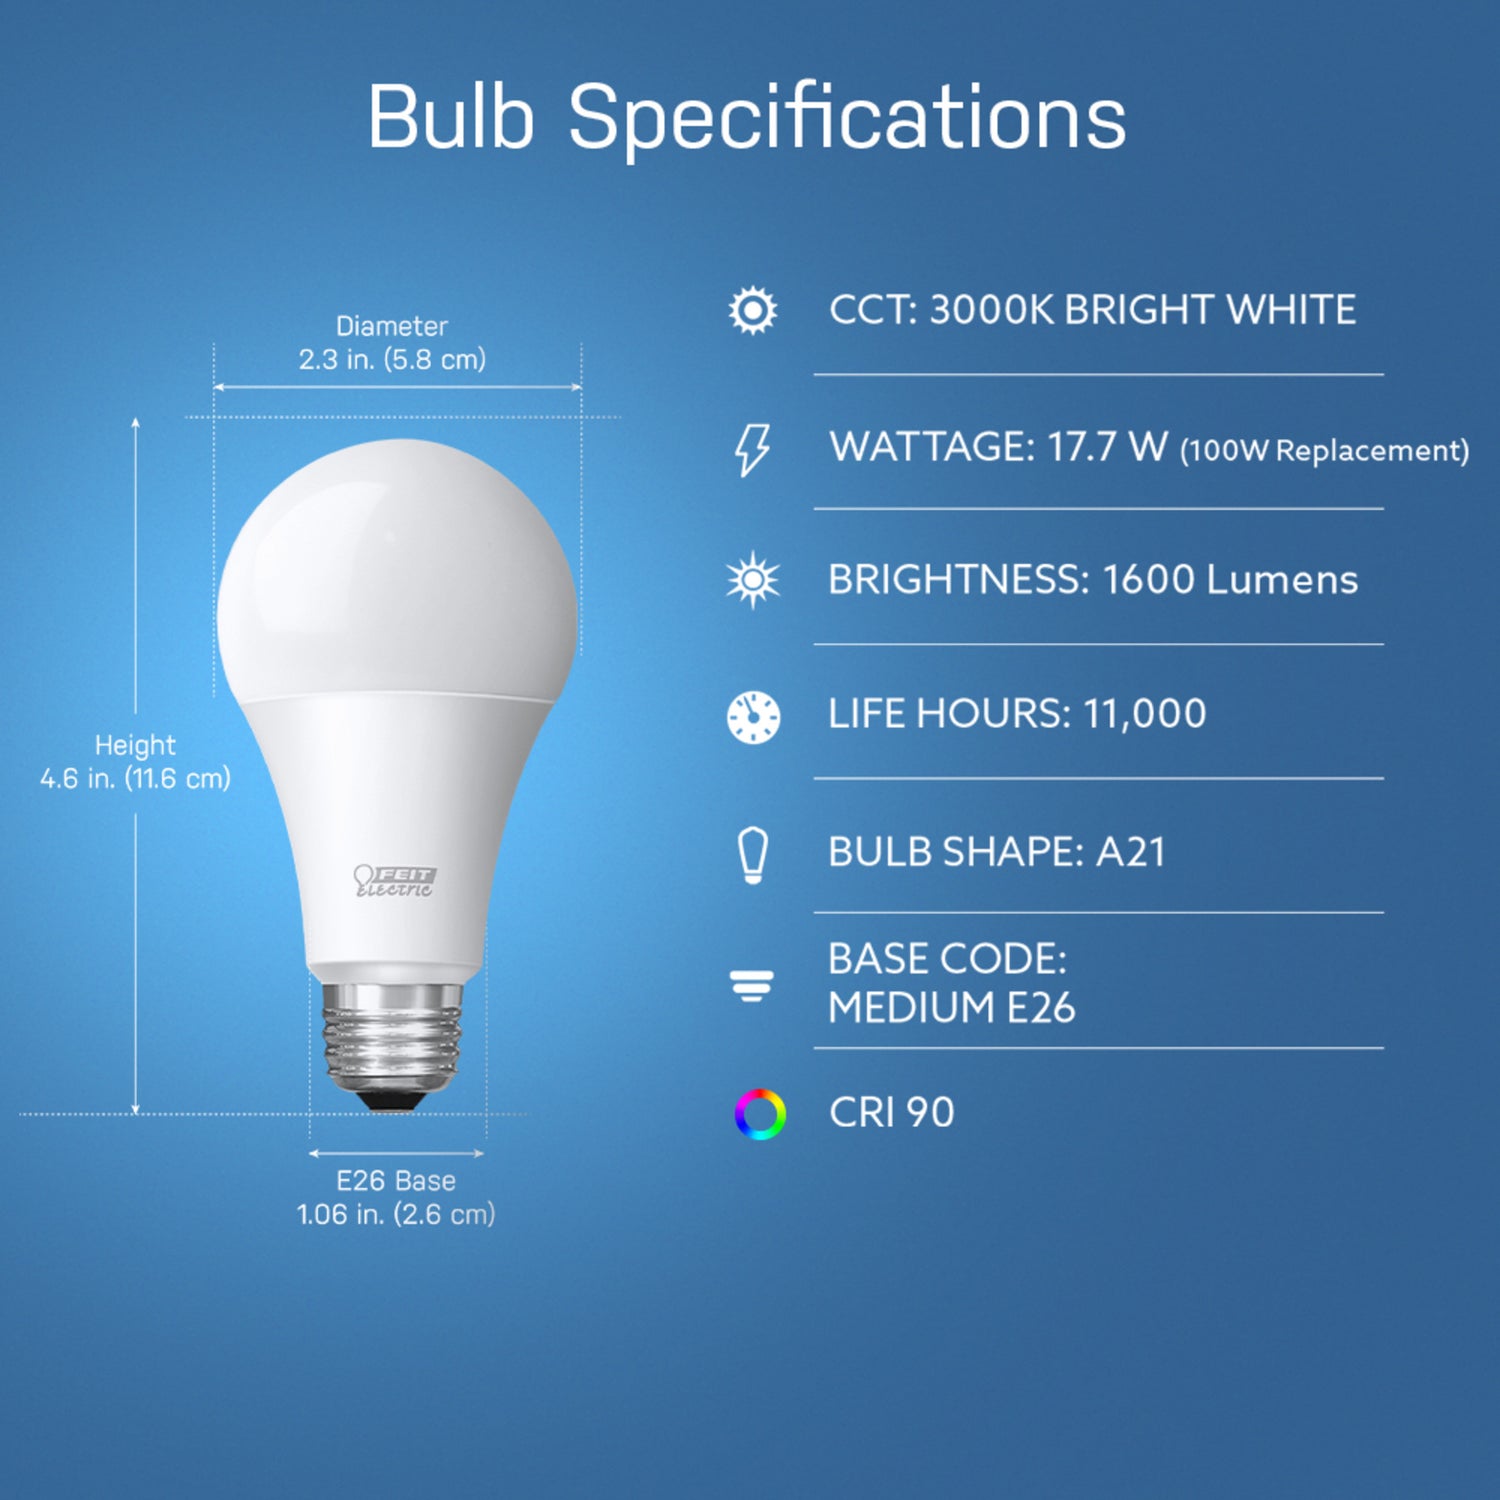 17.7W (100W Replacement) Daylight (5000K) E26 Base A19 Non-Dimmable General Purpose Enhance LED Bulb (6-Pack)